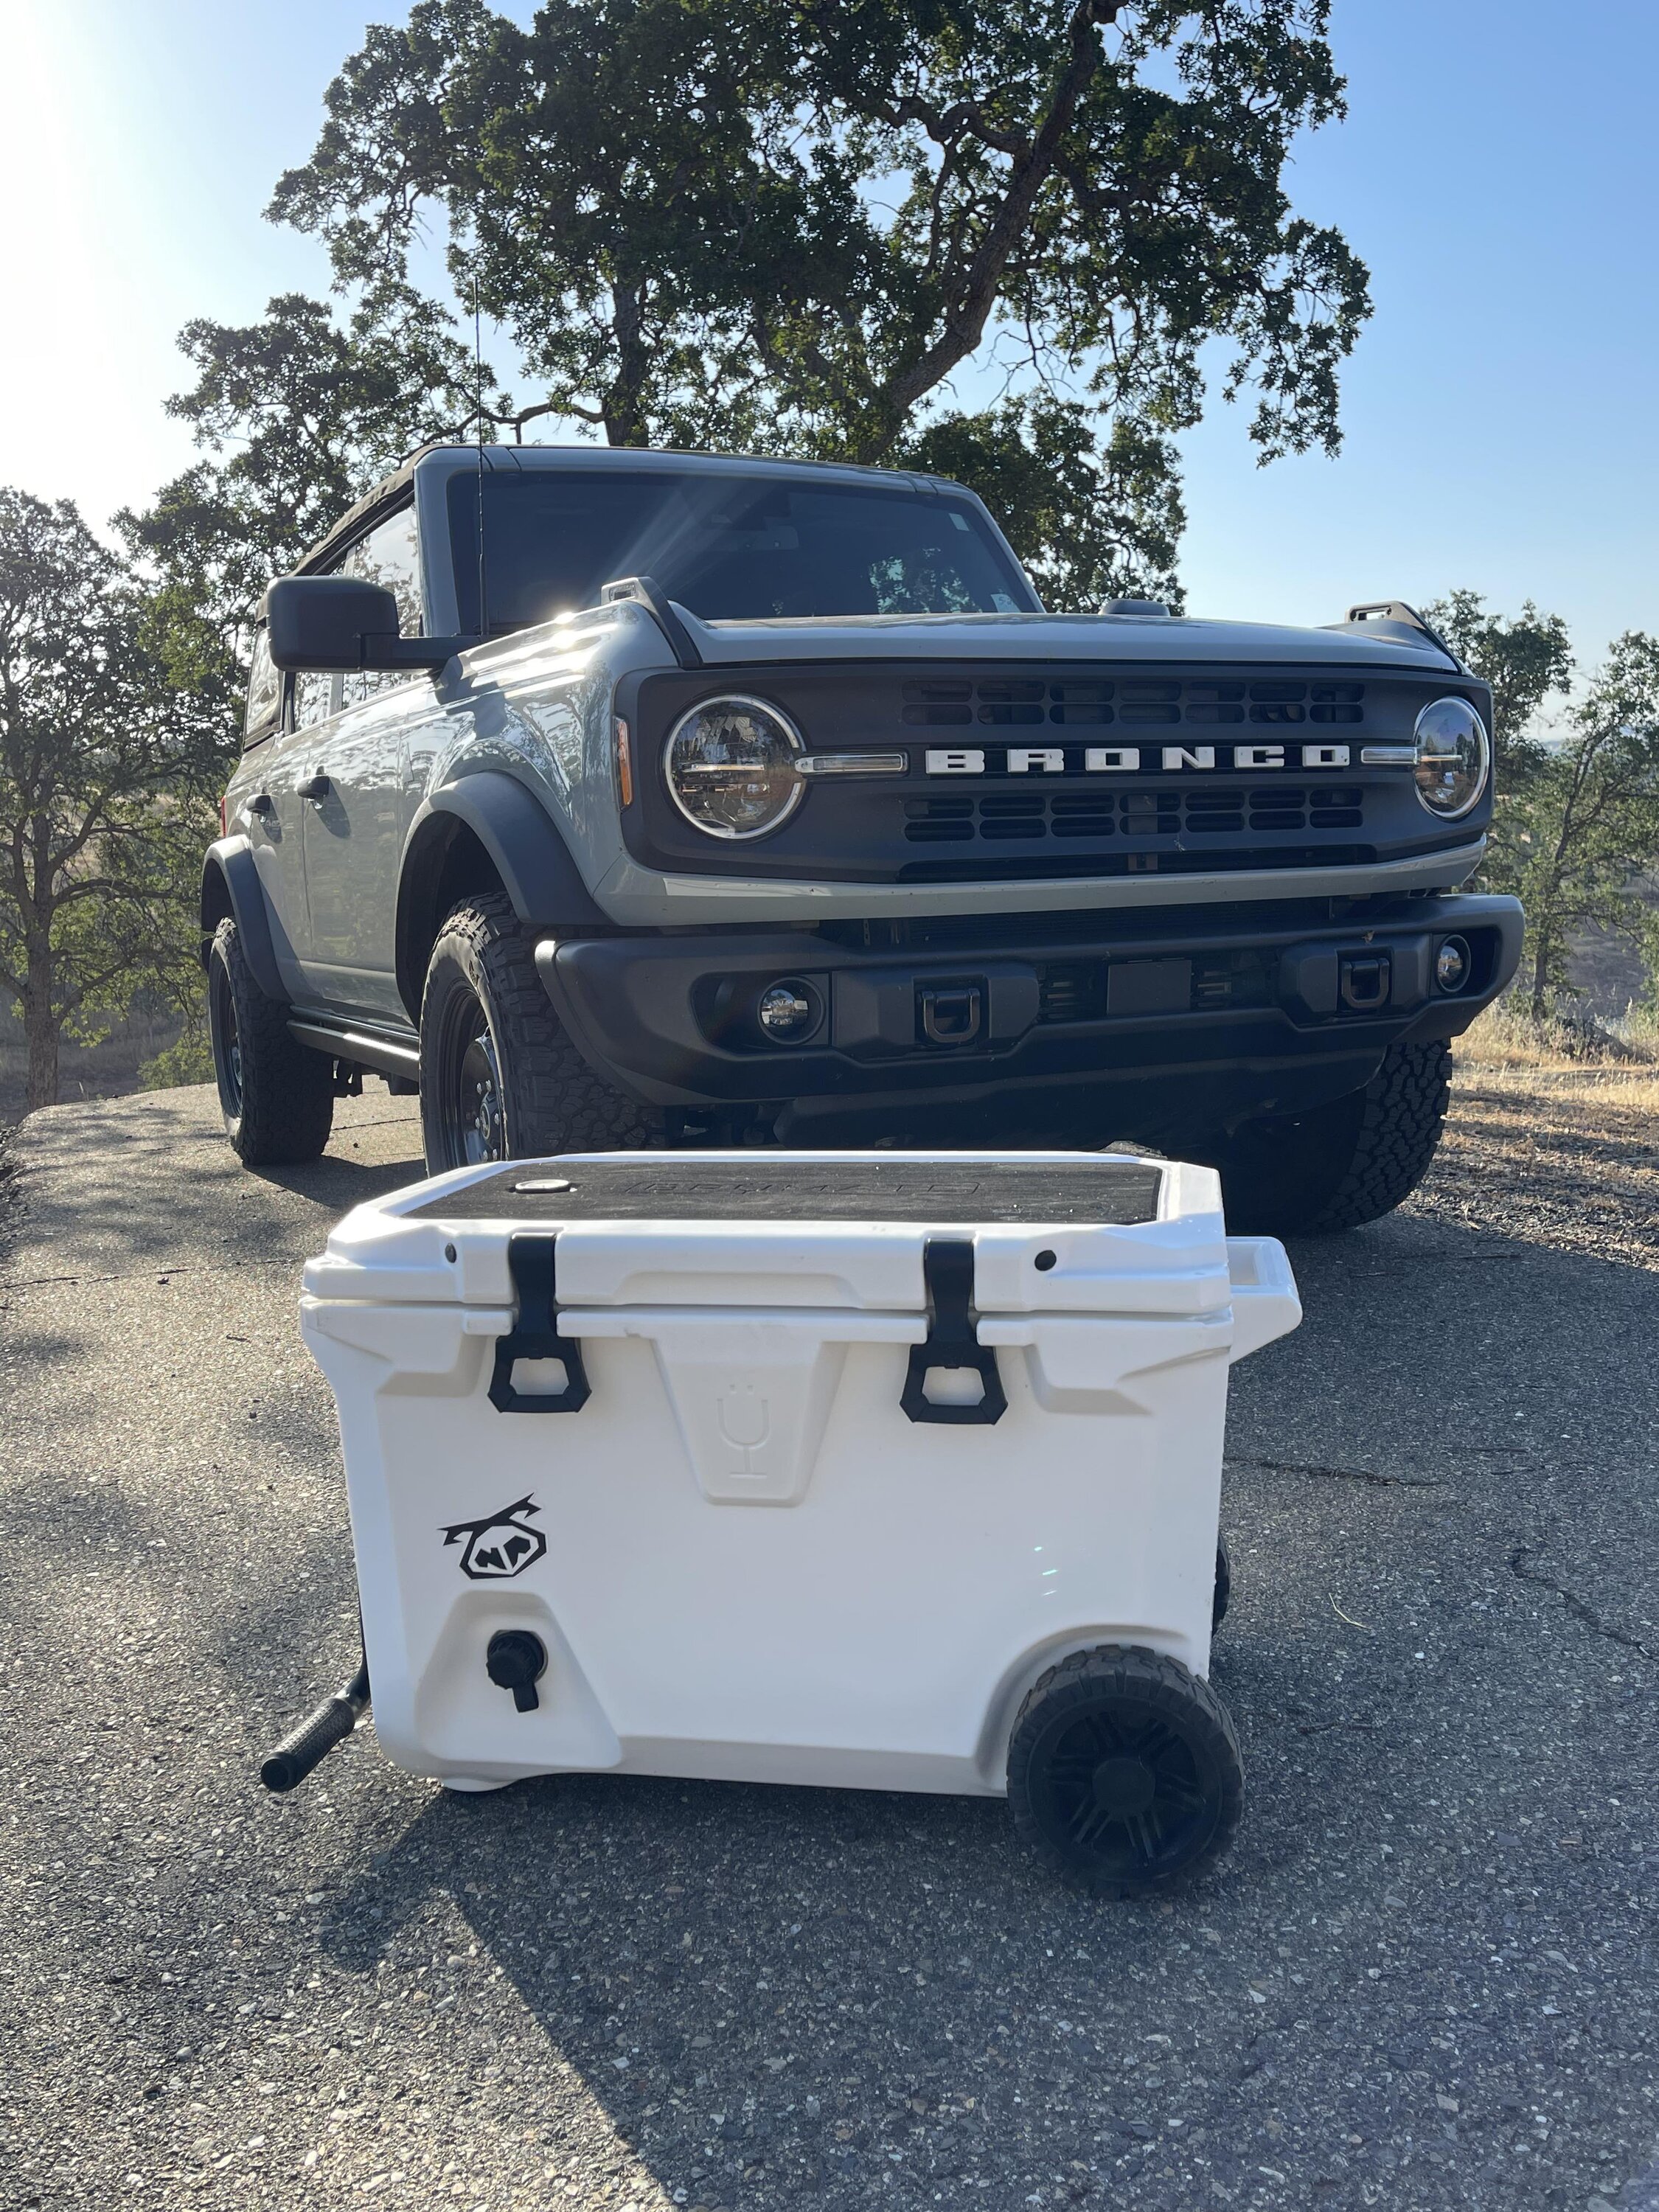 Ford Bronco Show Us Your Coolers! (Not Fridges) received_271694395422998